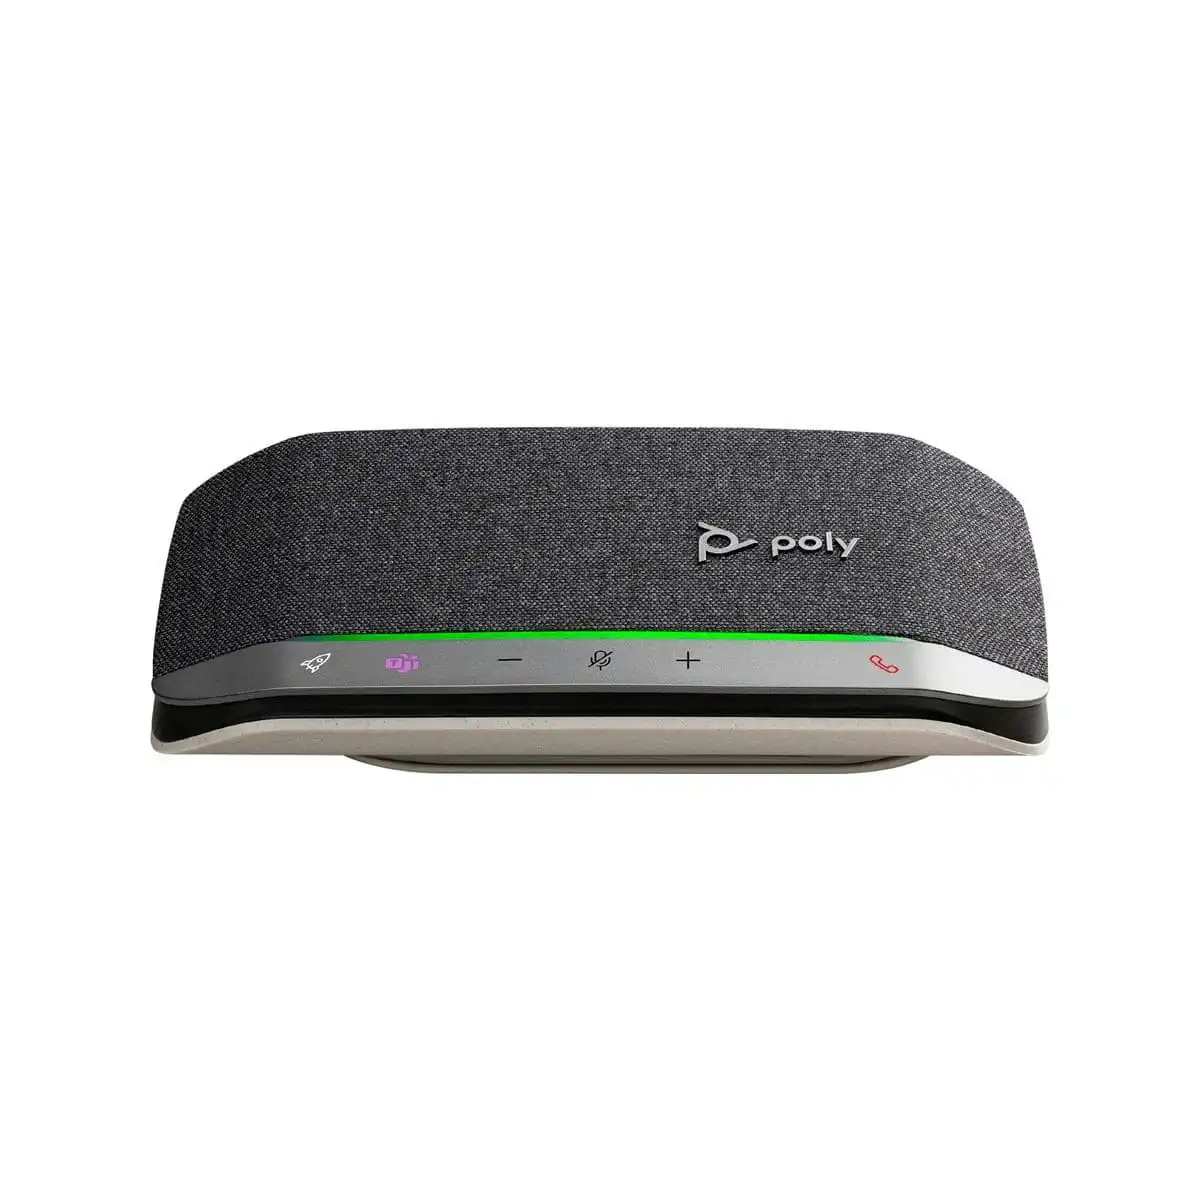 Poly Sync 20 USB Smart Speakerphone for Home Office